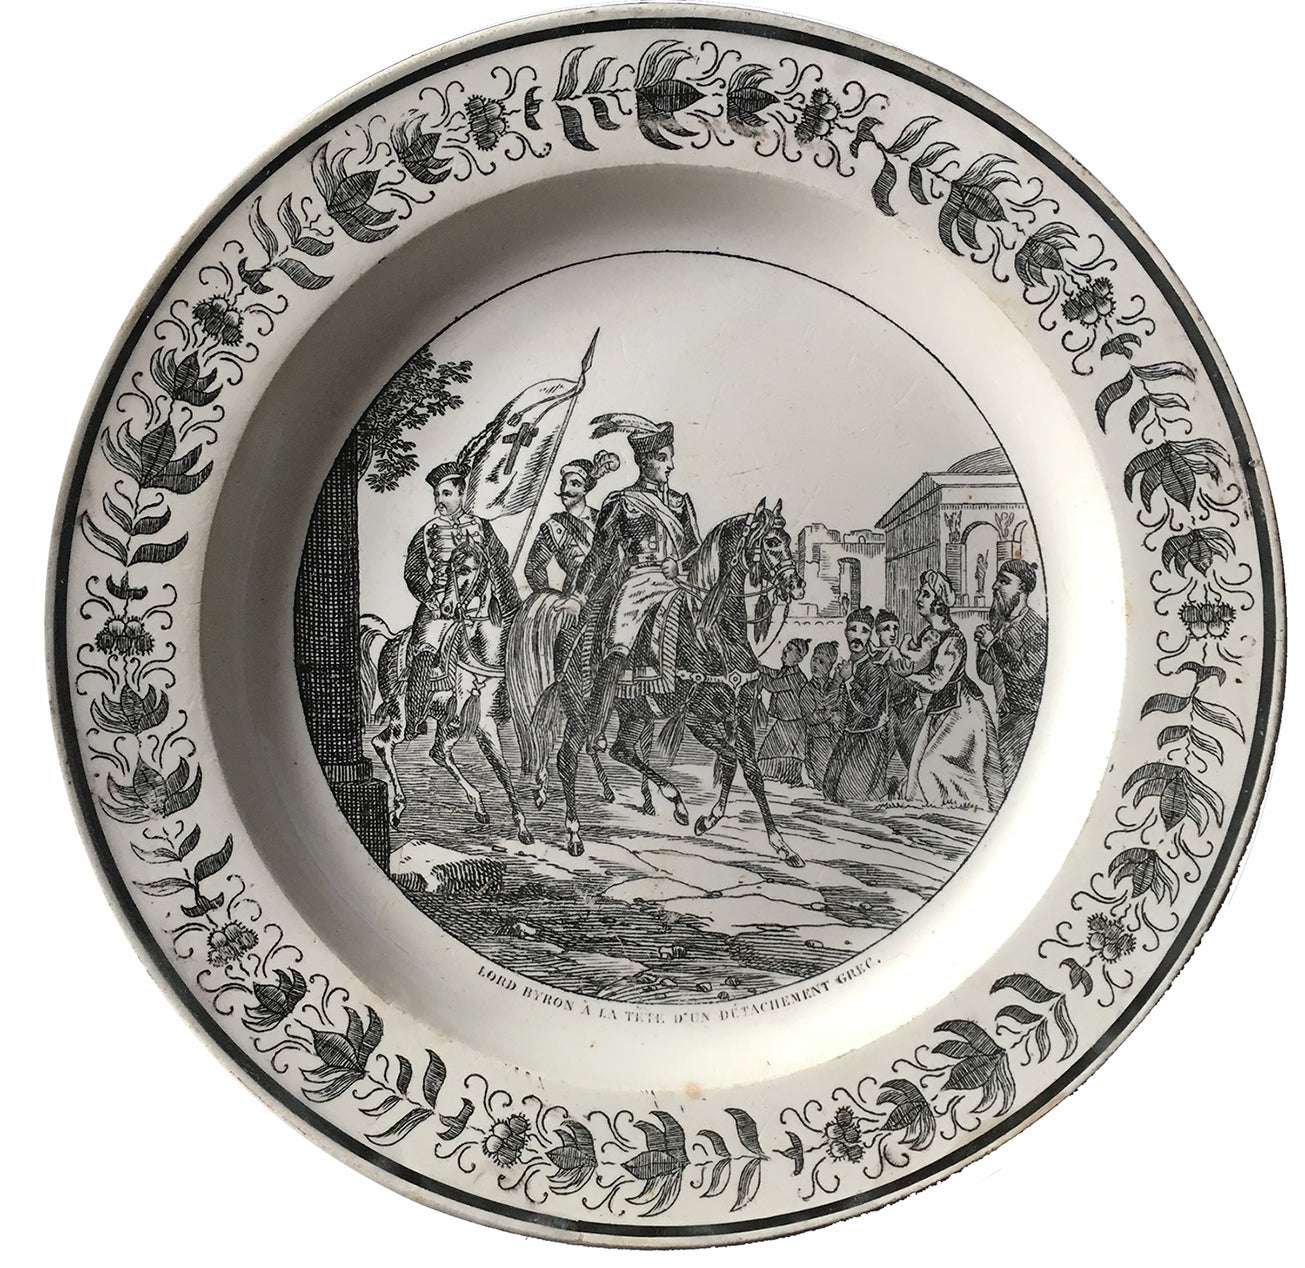 SOLD French Creil and Montreau Creamware Plate, Transfer-Printed with Scene of Byron Leading his Greek Troops